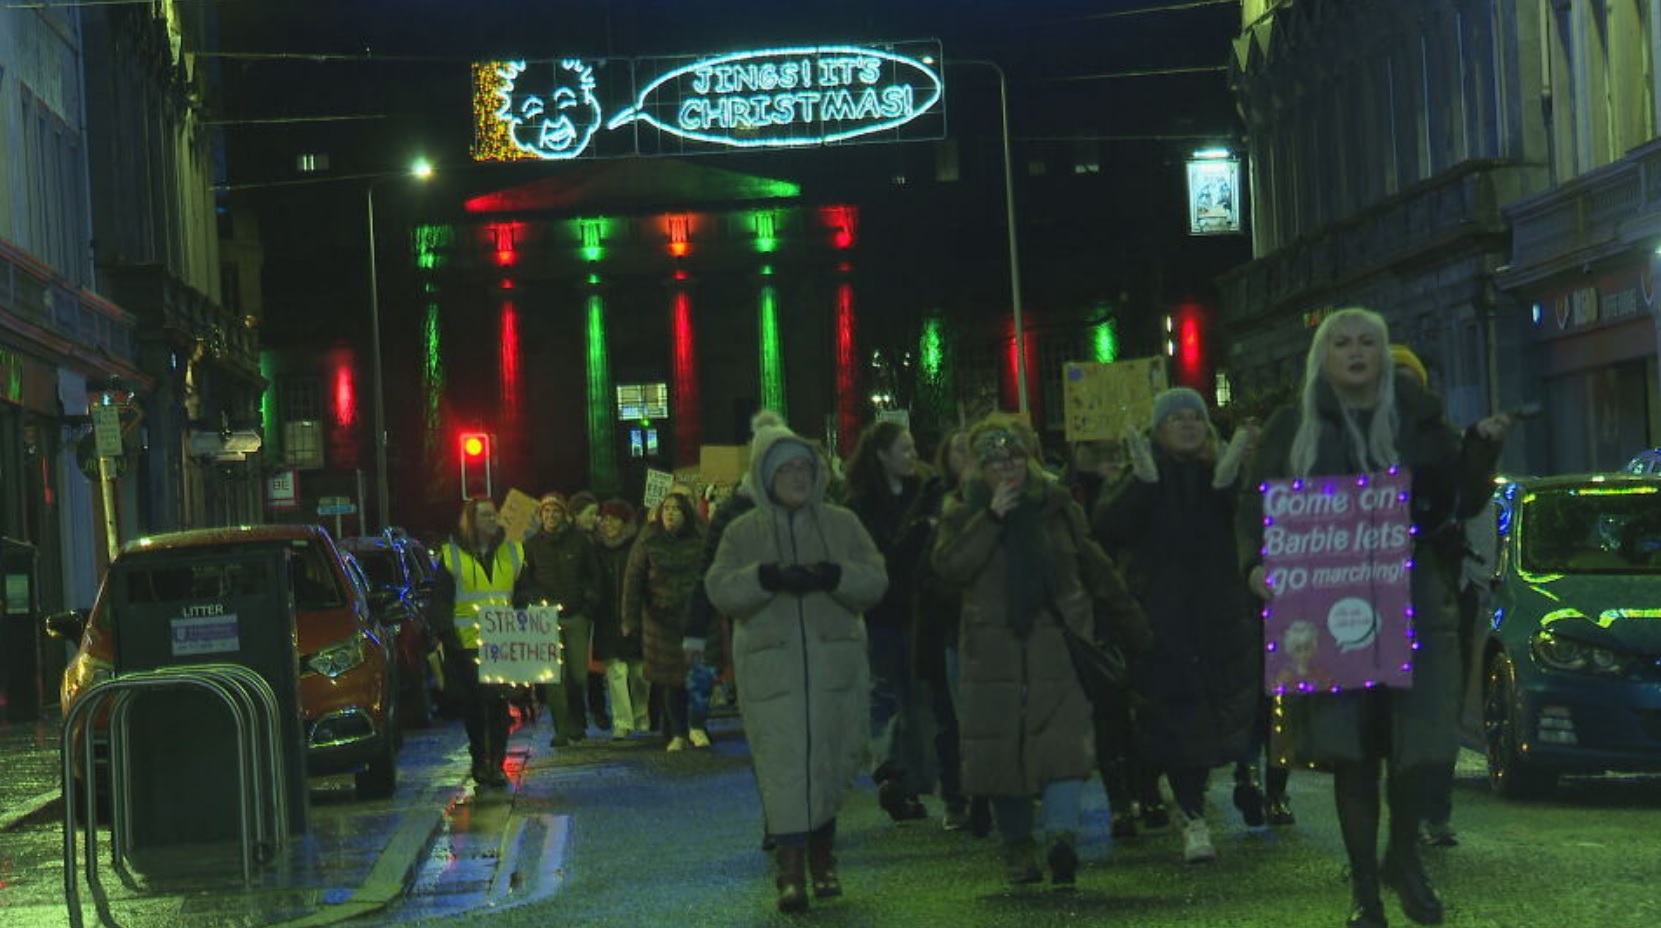 The Reclaim the Night march took place on Monday, November 27